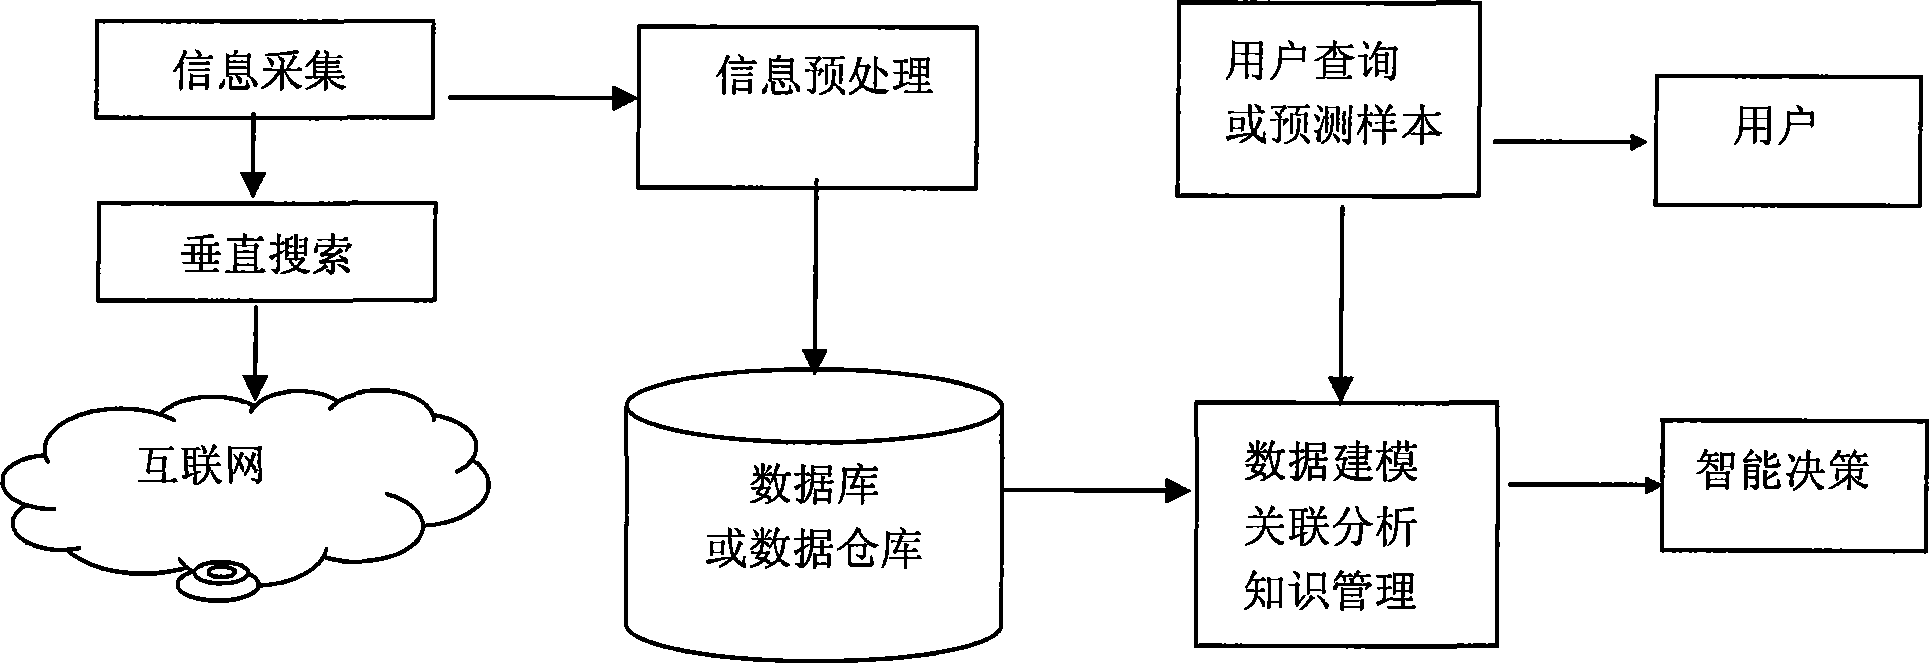 Vertical search based network data excavation method